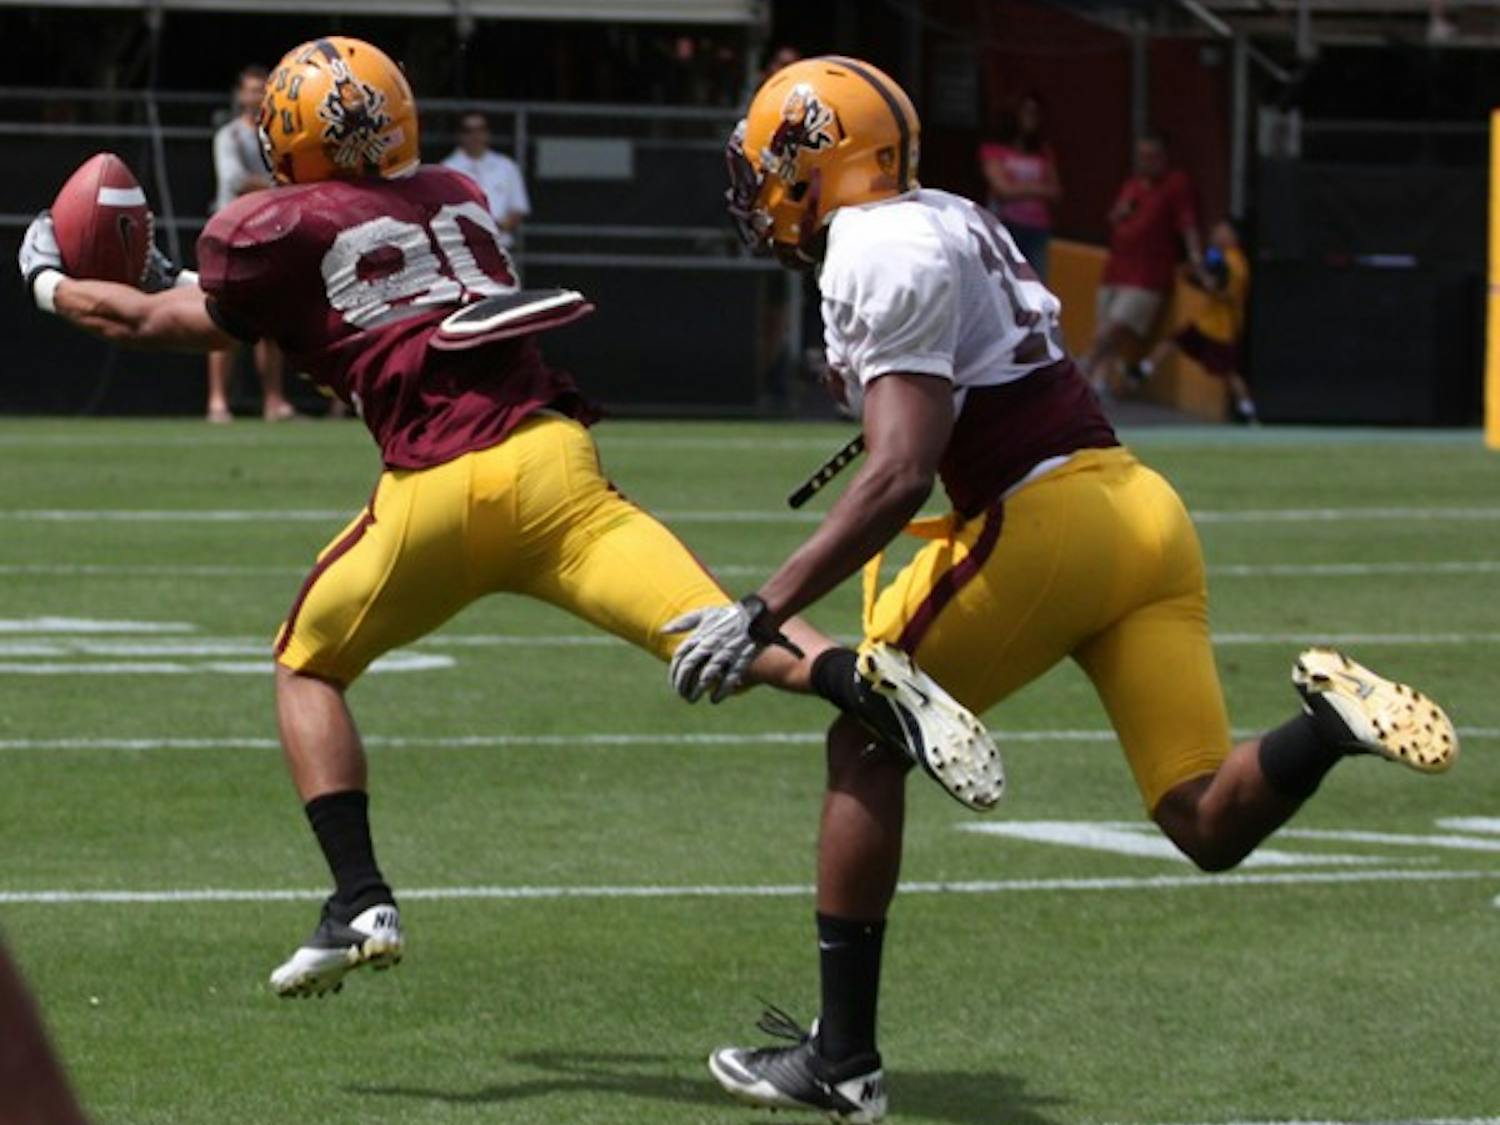 Offense rolls: ASU redshirt sophomore J. J. Holliday makes a grab near the sideline with redshirt sophomore Osahon Irabor defending. The Sun Devil offense controlled the spring game from the start, racking up over 600 yards. (Photo by Beth Easterbrook)